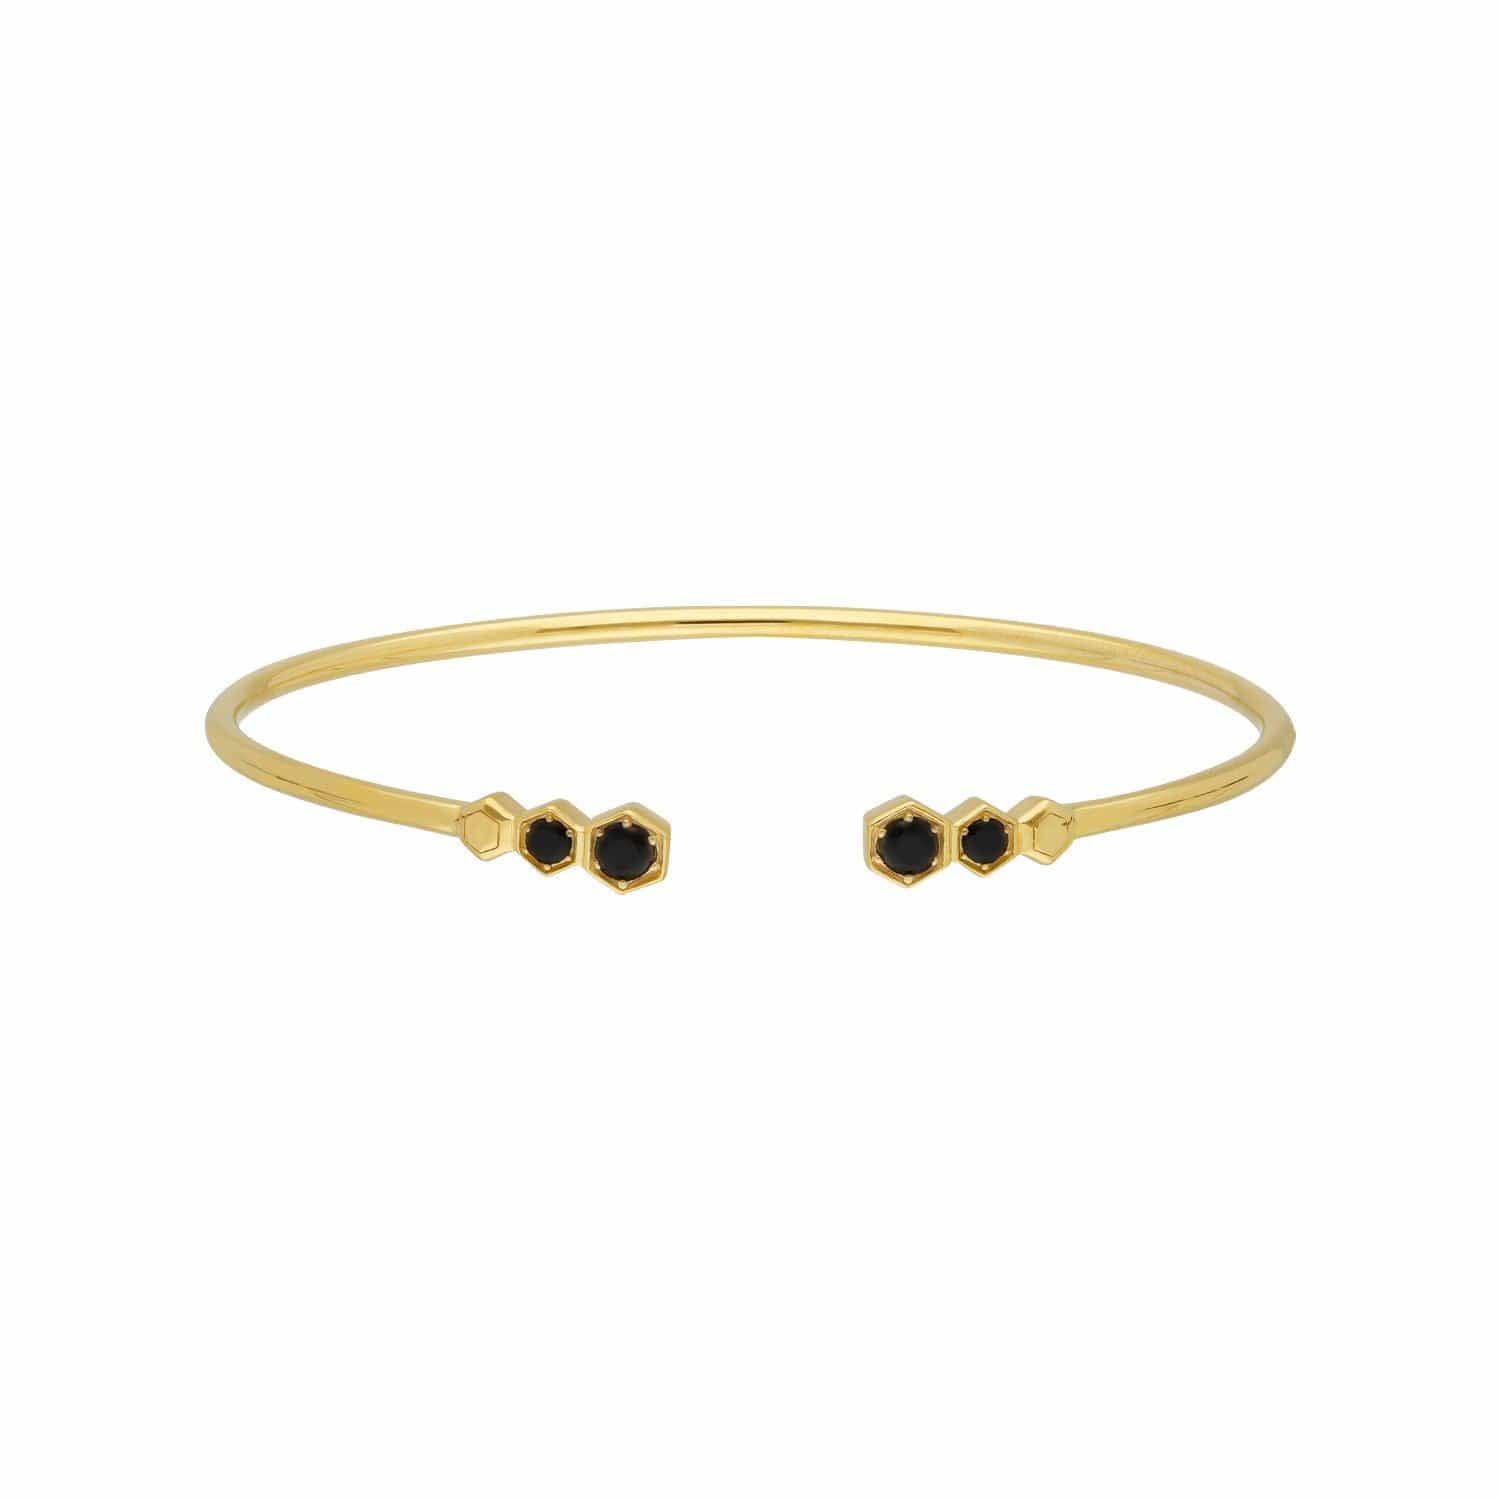 Geometric Black Onyx Open Bangle in Gold Plated Sterling Silver